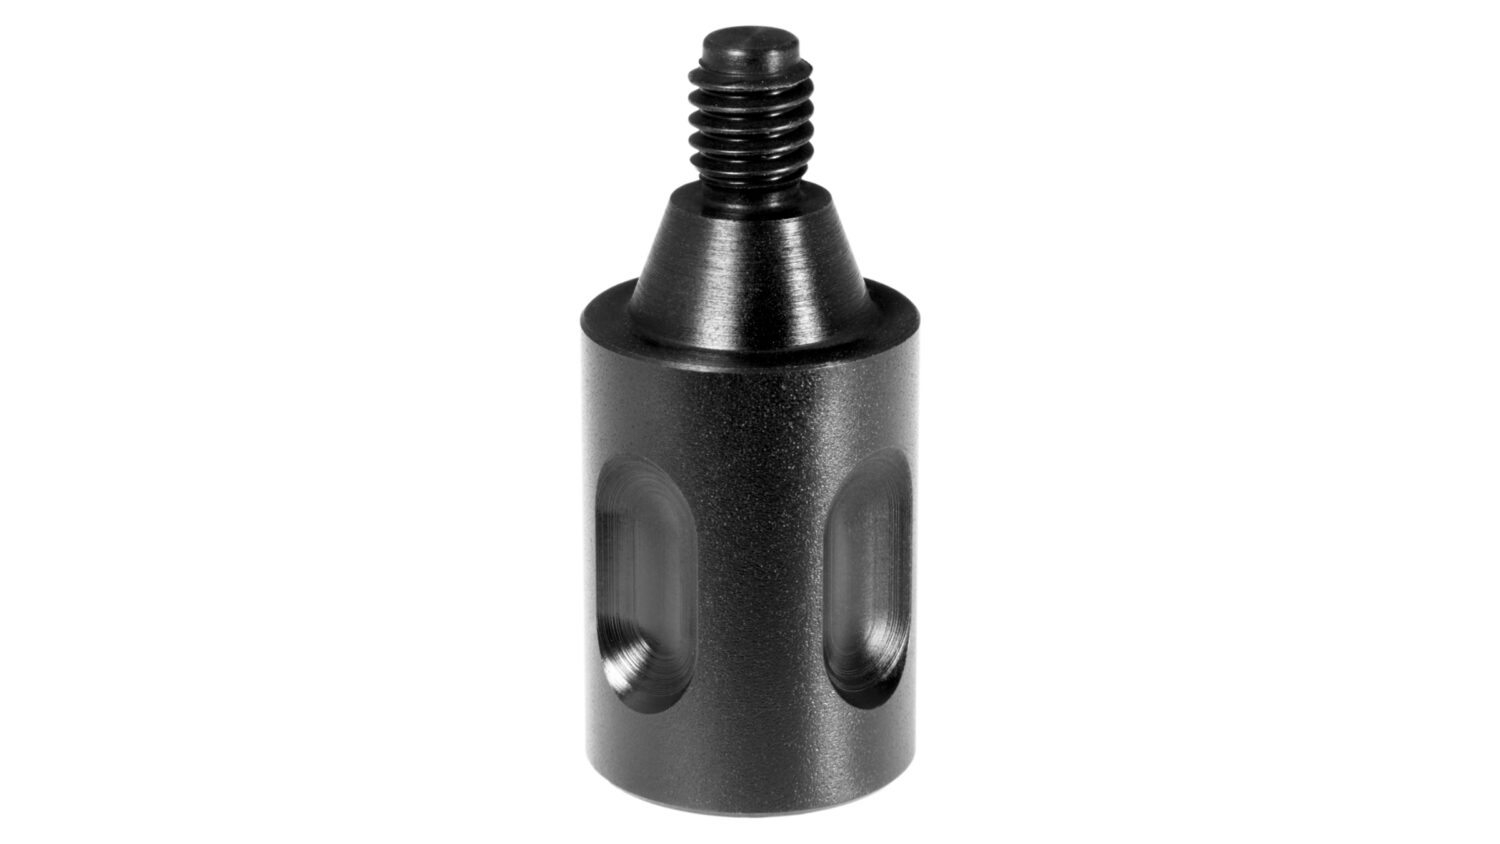 FOBA adapter from screws to combitube